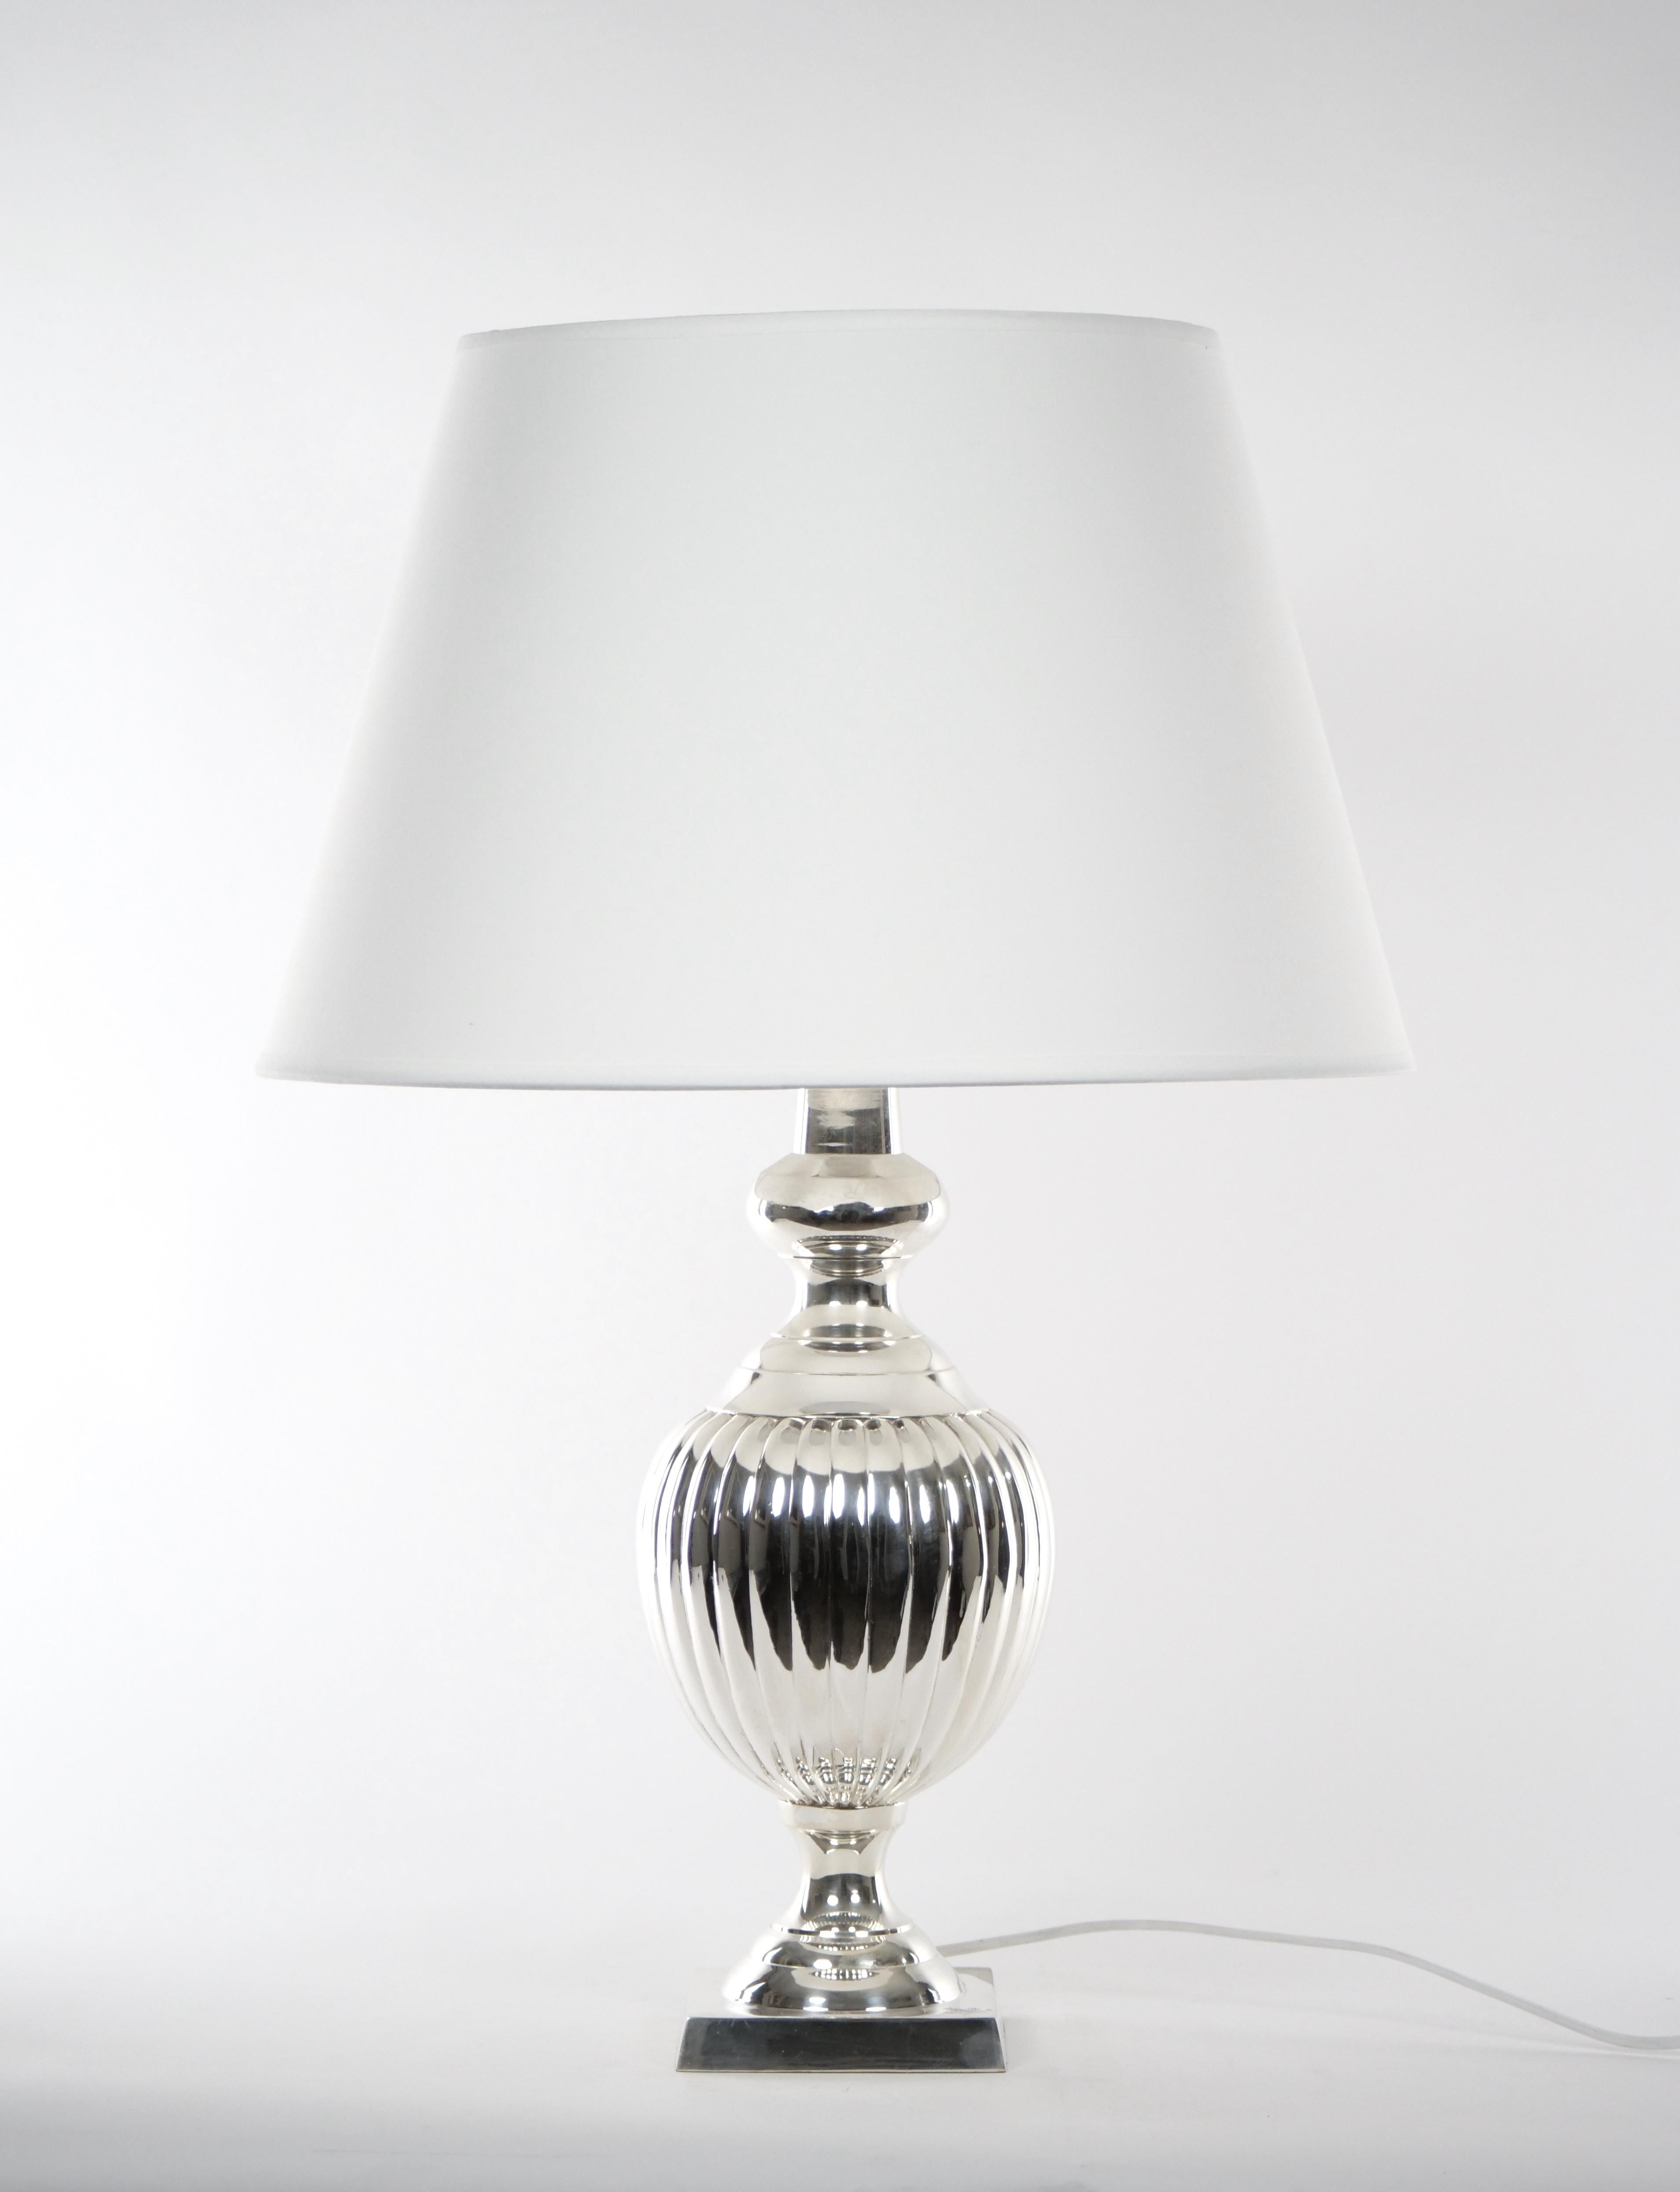 Beautiful English silver plate Royal Sheffield pair urn shape vase table lamp. Each lamp features an exterior swirl decorated design resting on a square footed base. Each lamp is in great working condition. No special light bulb required. Rewired